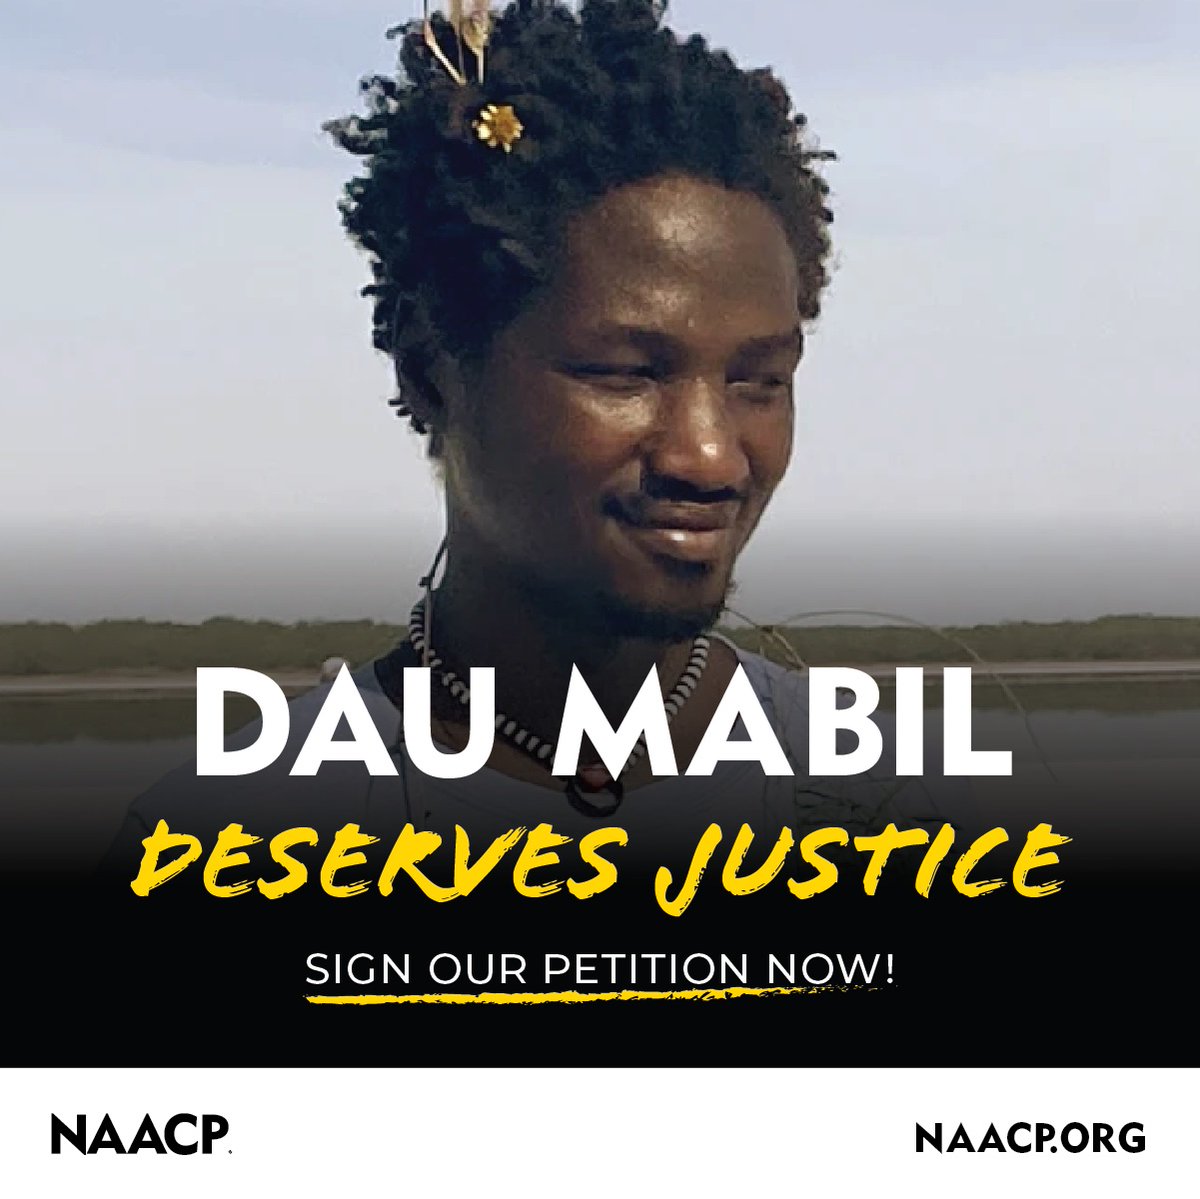 We demand answers and justice for Dau Mabil, a 37-year-old from Jackson, MS whose mysterious disappearance and death have left more questions than answers. Sign our petition calling for @theJusticeDept to launch a thorough investigation: bit.ly/3Jx7neE